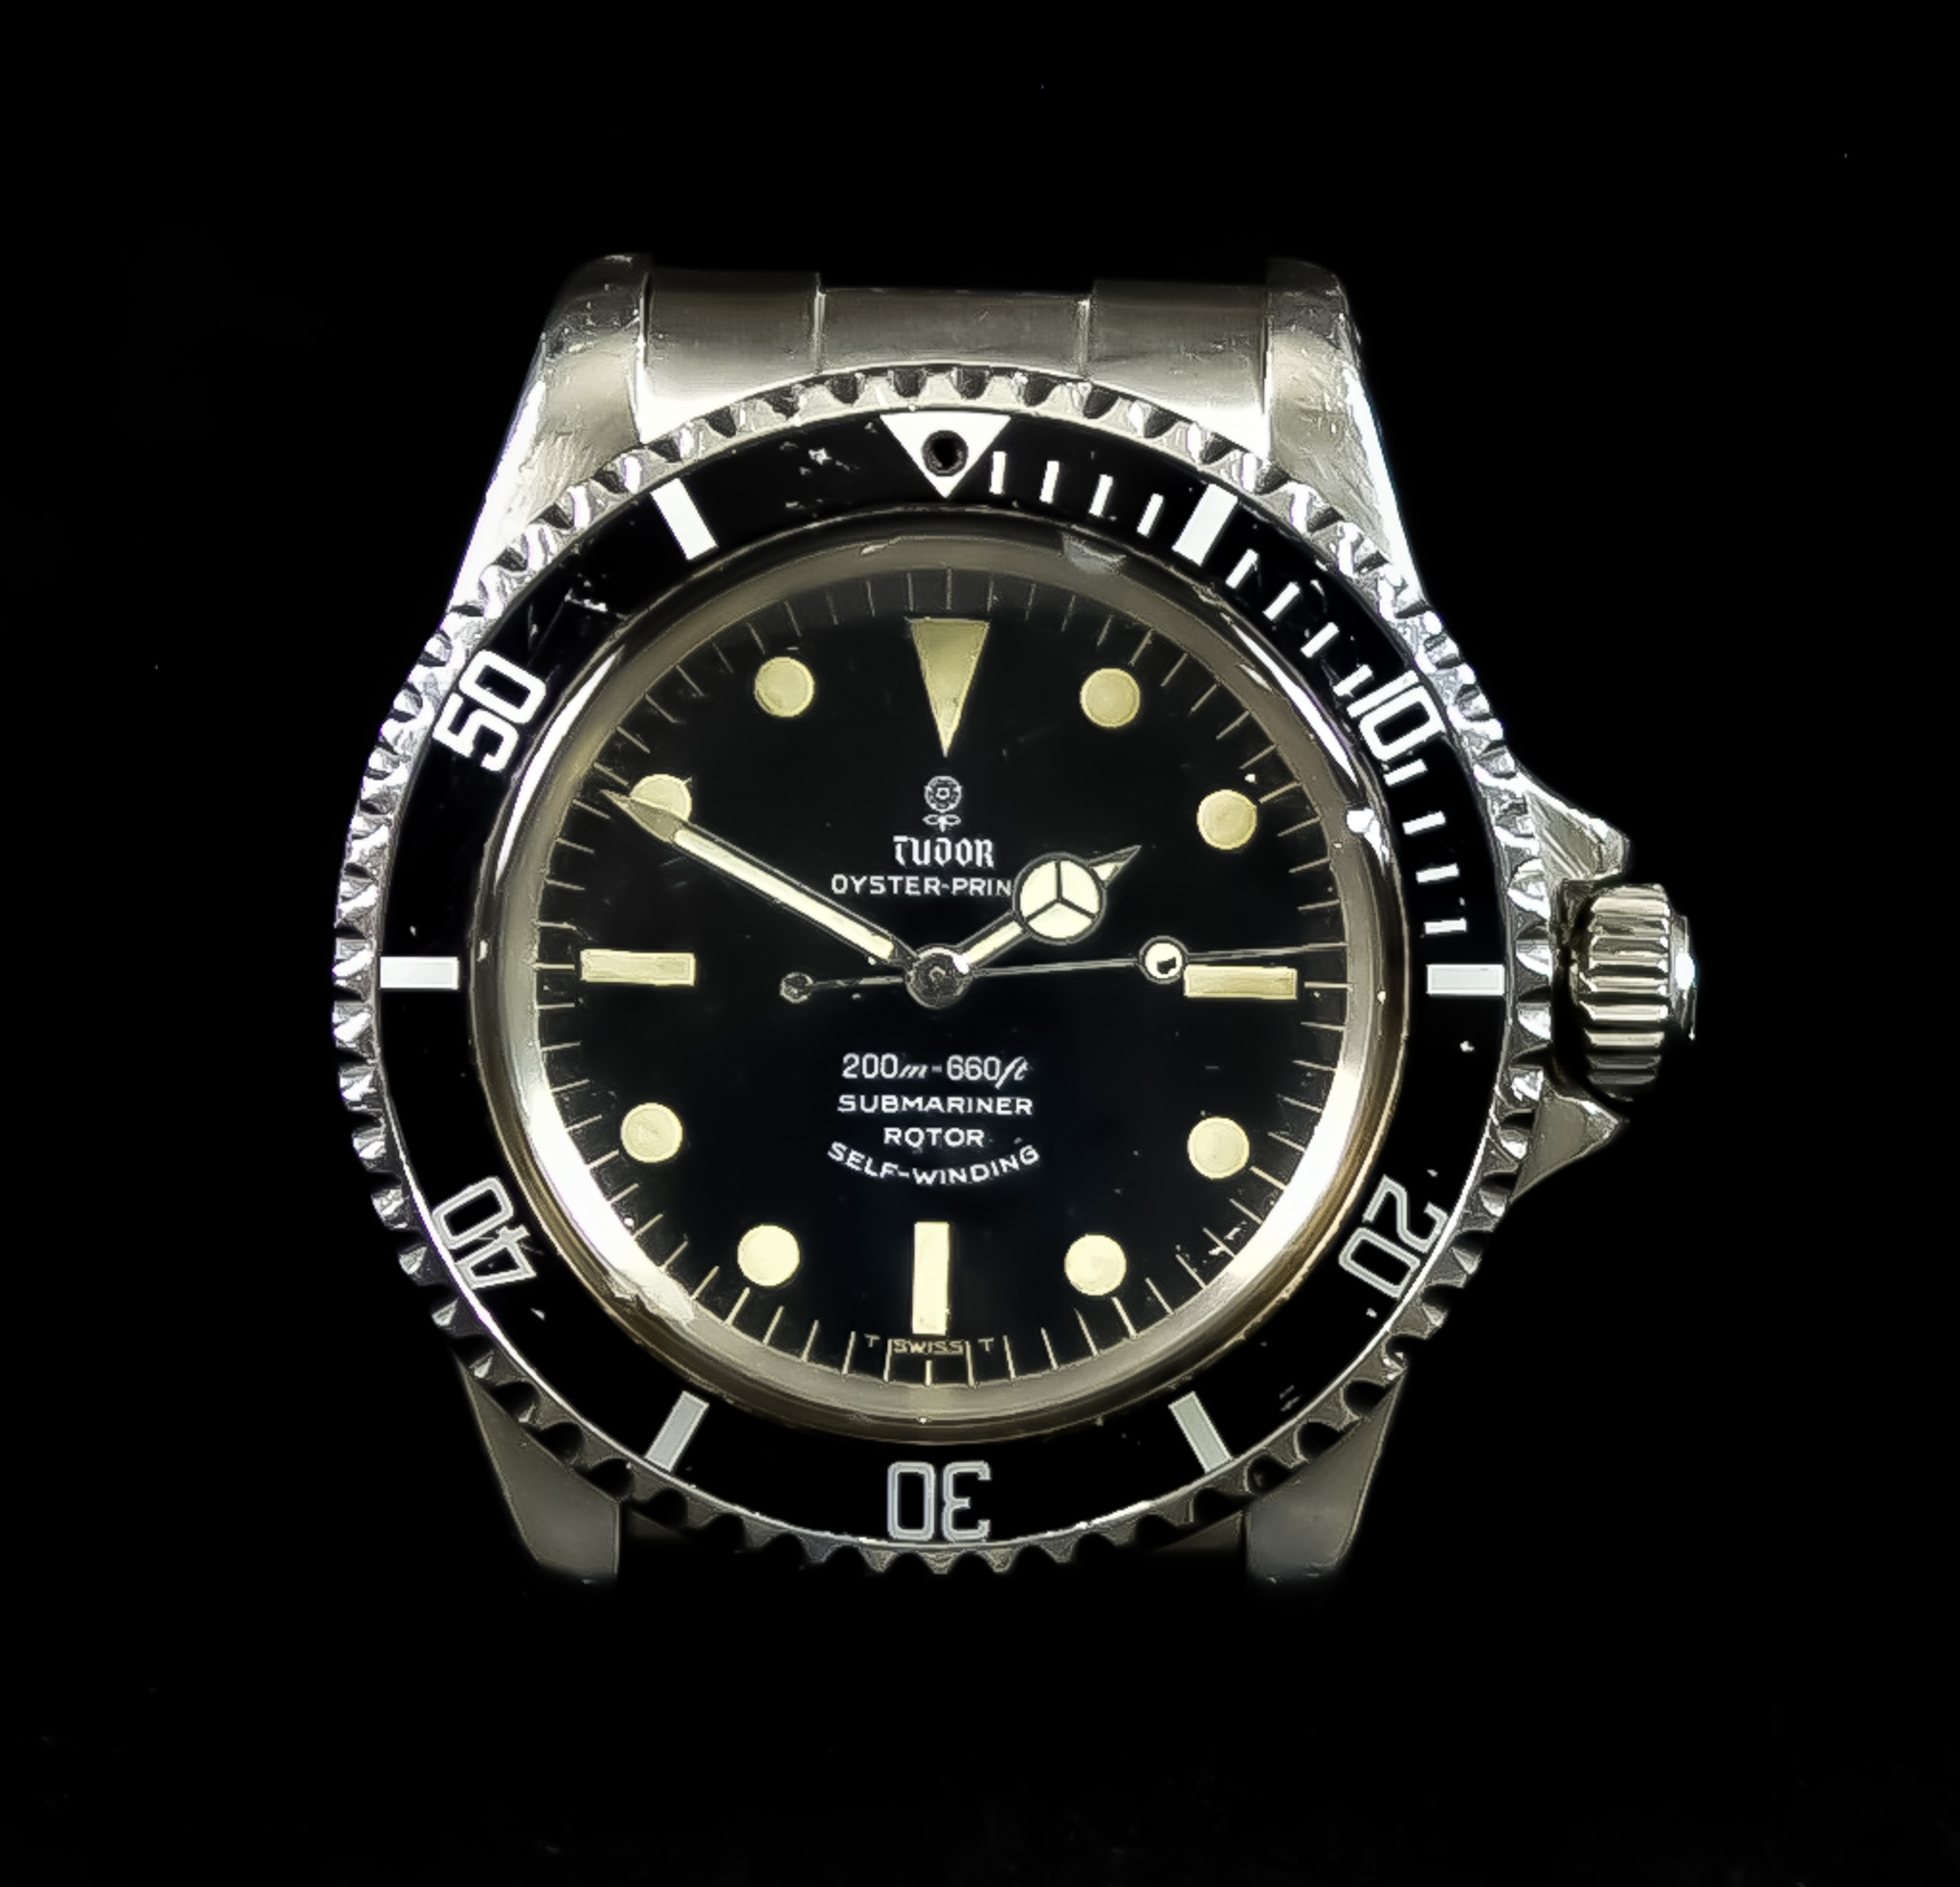 A Gentleman's Rare Oyster-Prince Sub Mariner Automatic Wristwatch by Tudor, 1966, serial no